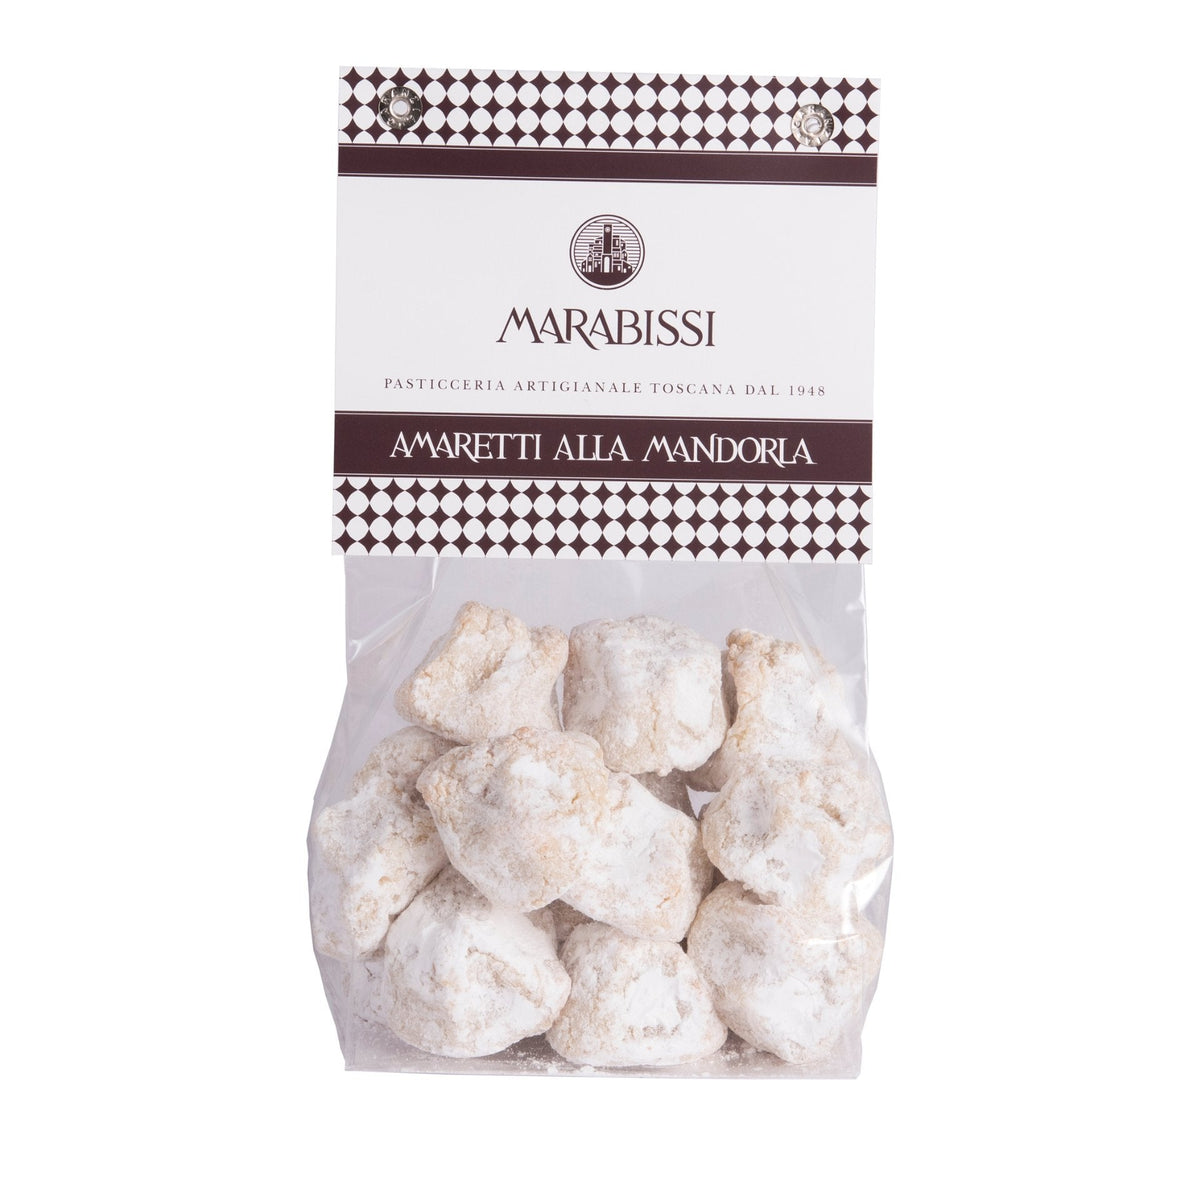 Marabissi Soft Almond Amaretti (Bag) 200g  | Imported and distributed in the UK by Just Gourmet Foods